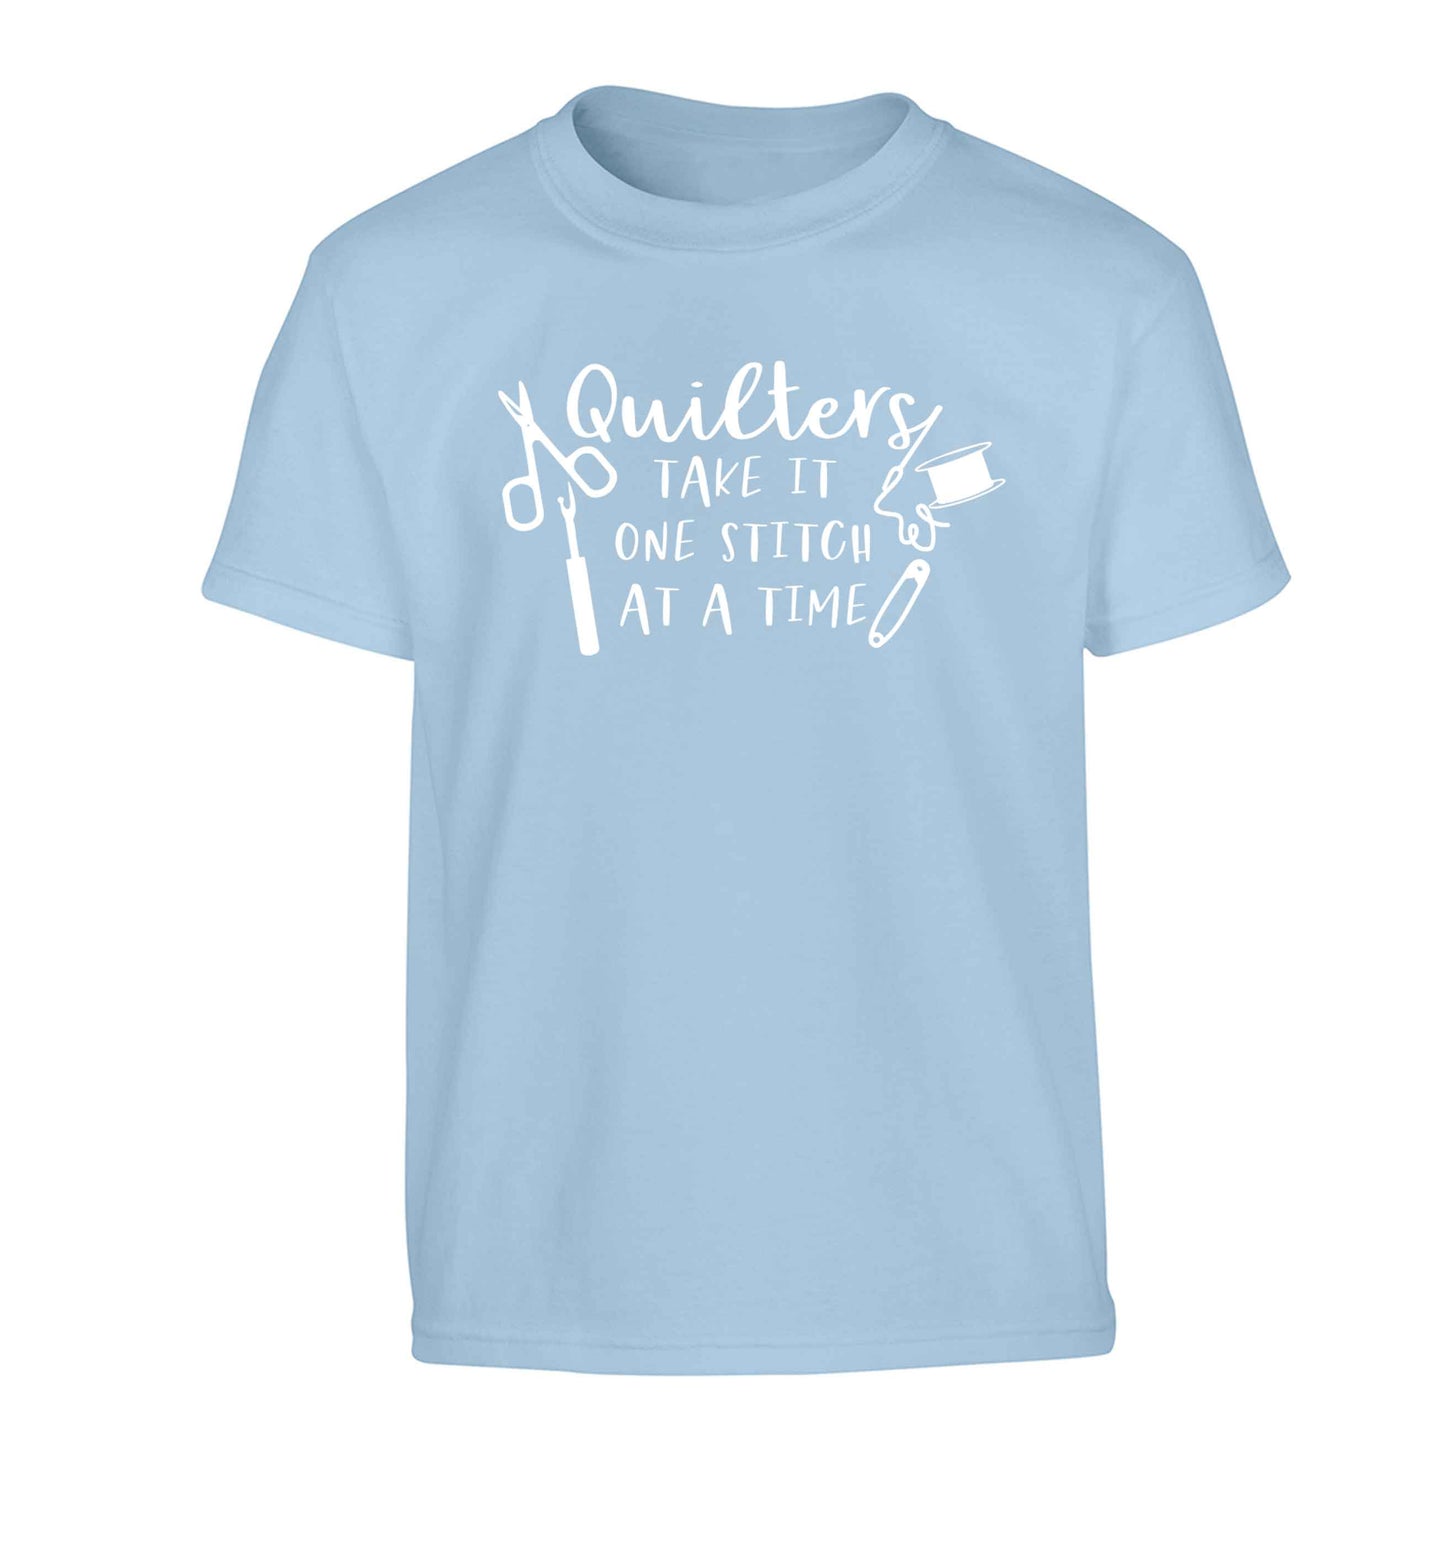 Quilters take it one stitch at a time  Children's light blue Tshirt 12-13 Years